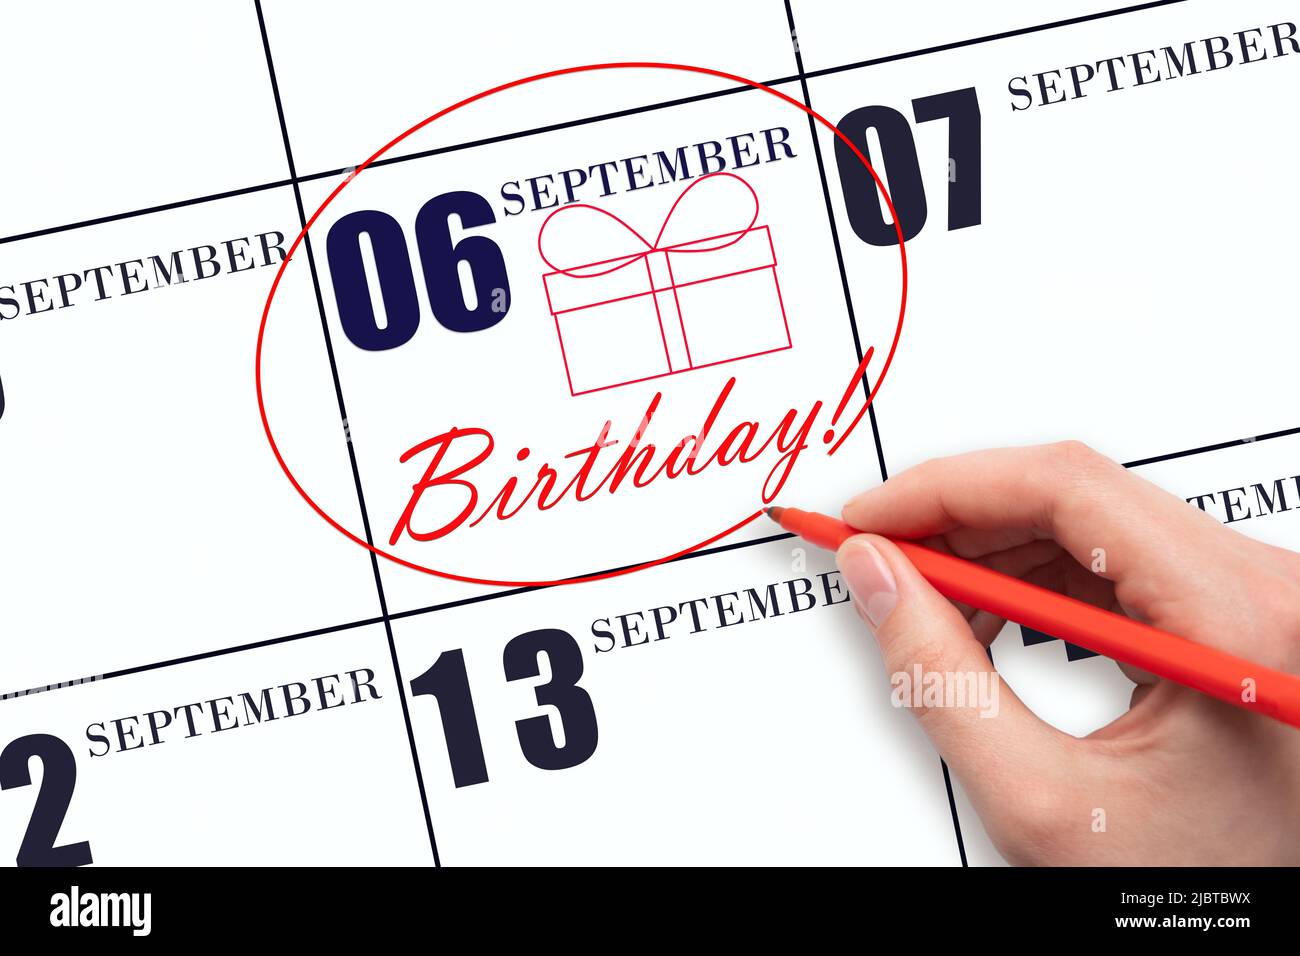 6th day of September. The hand circles the date on the calendar 6 September , draws a gift box and writes the text Birthday. Holiday. Autumn month, da Stock Photo